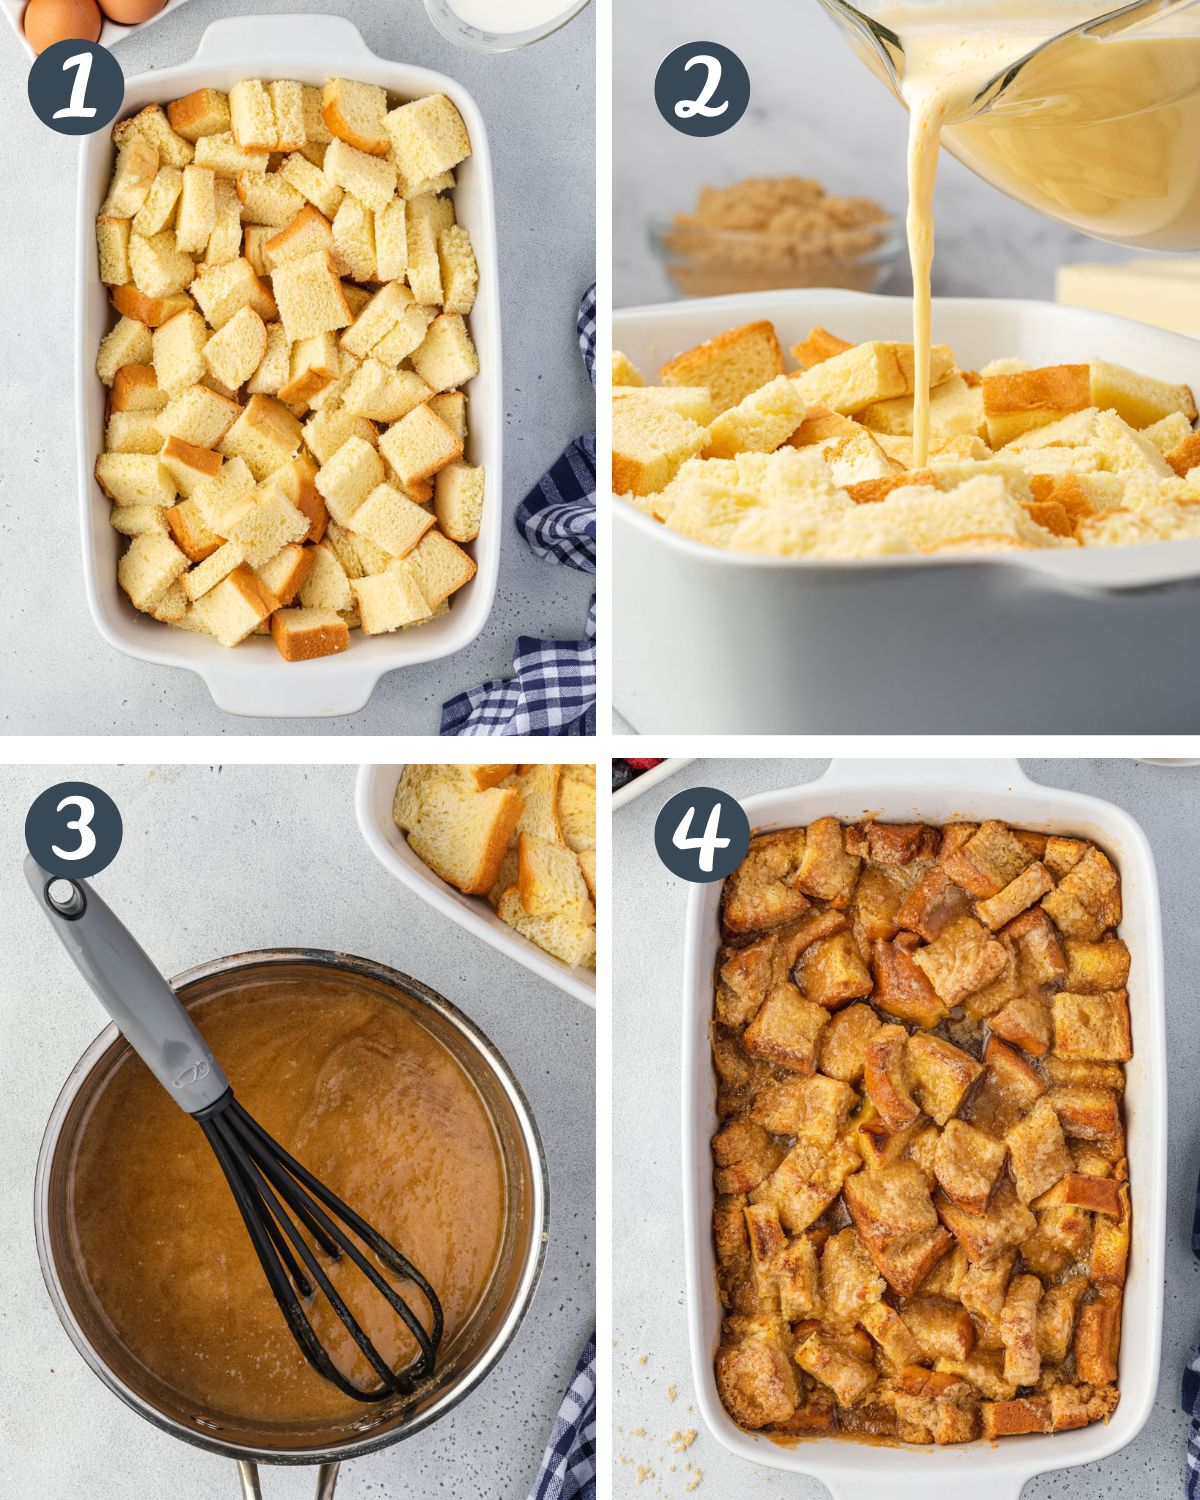 4 steps to making overnight french toast casserole: bread cubes, custard, sauce, and bake.